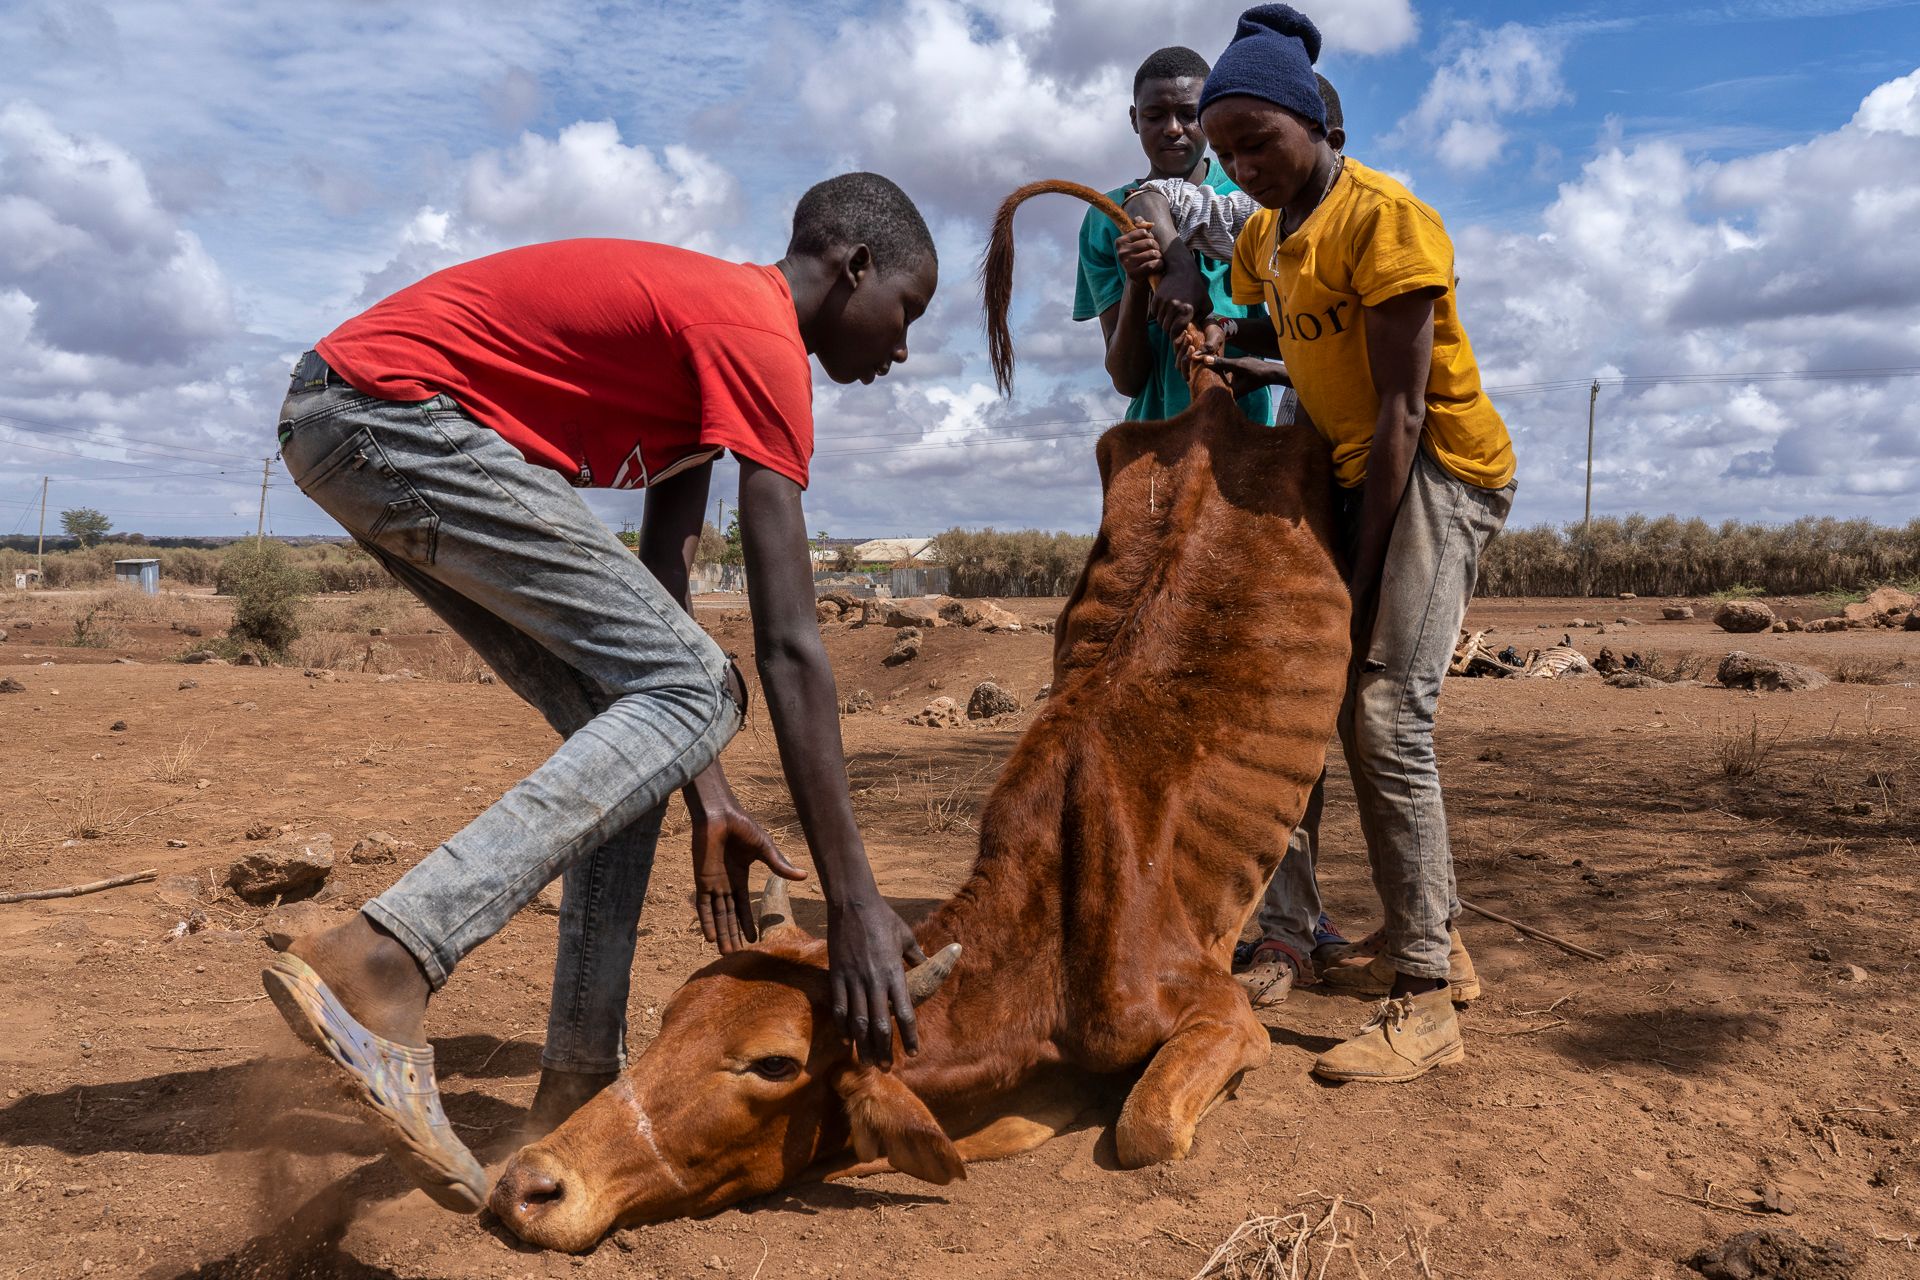 Men try to raise the hind quarters of a very thin near-dead cow during the height of the drought 